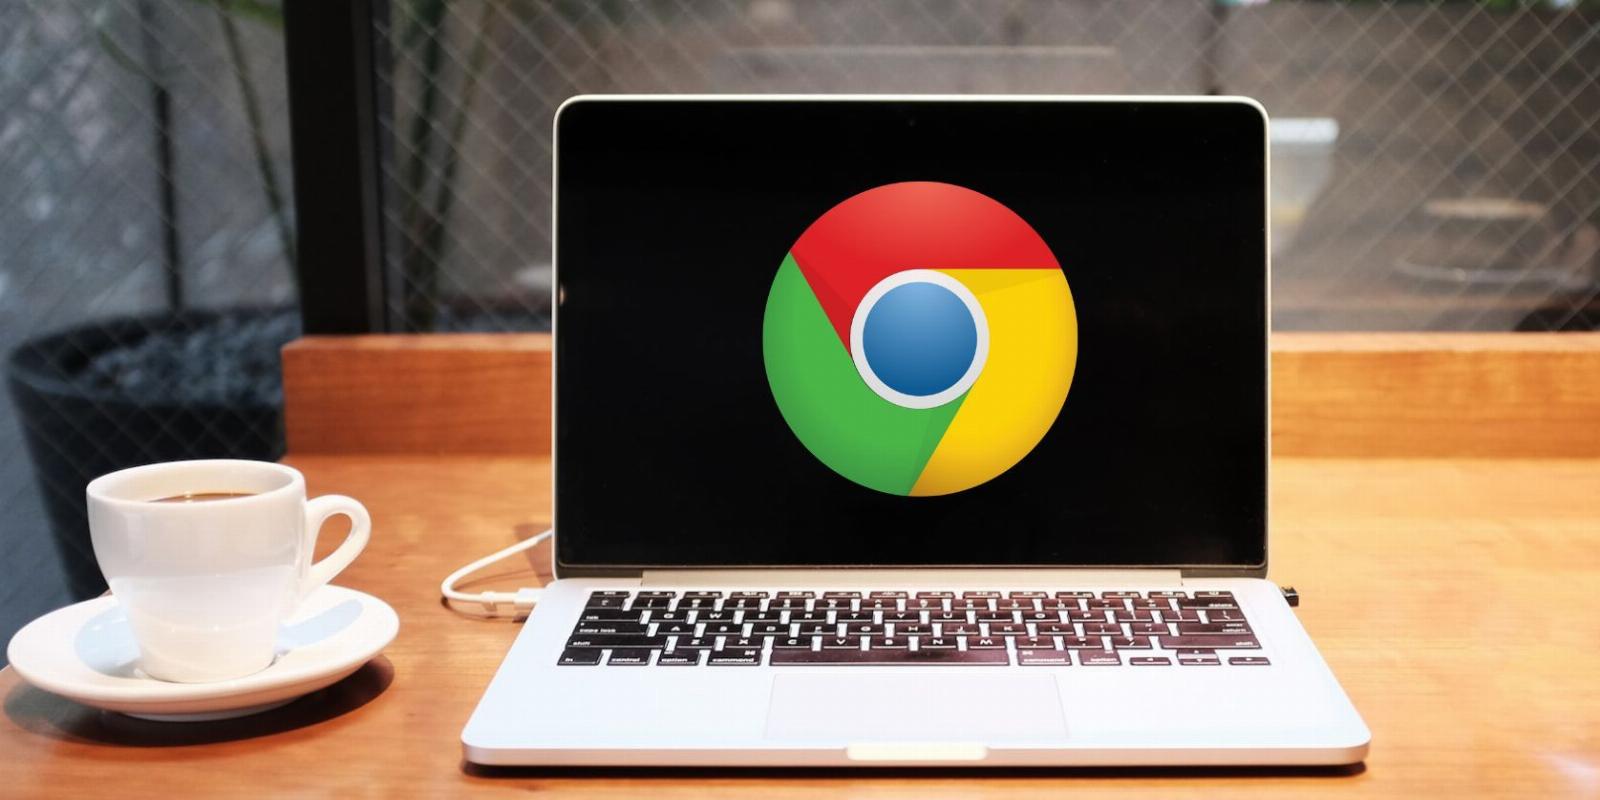 How to Fix the Google Chrome Black Screen Issue on Windows